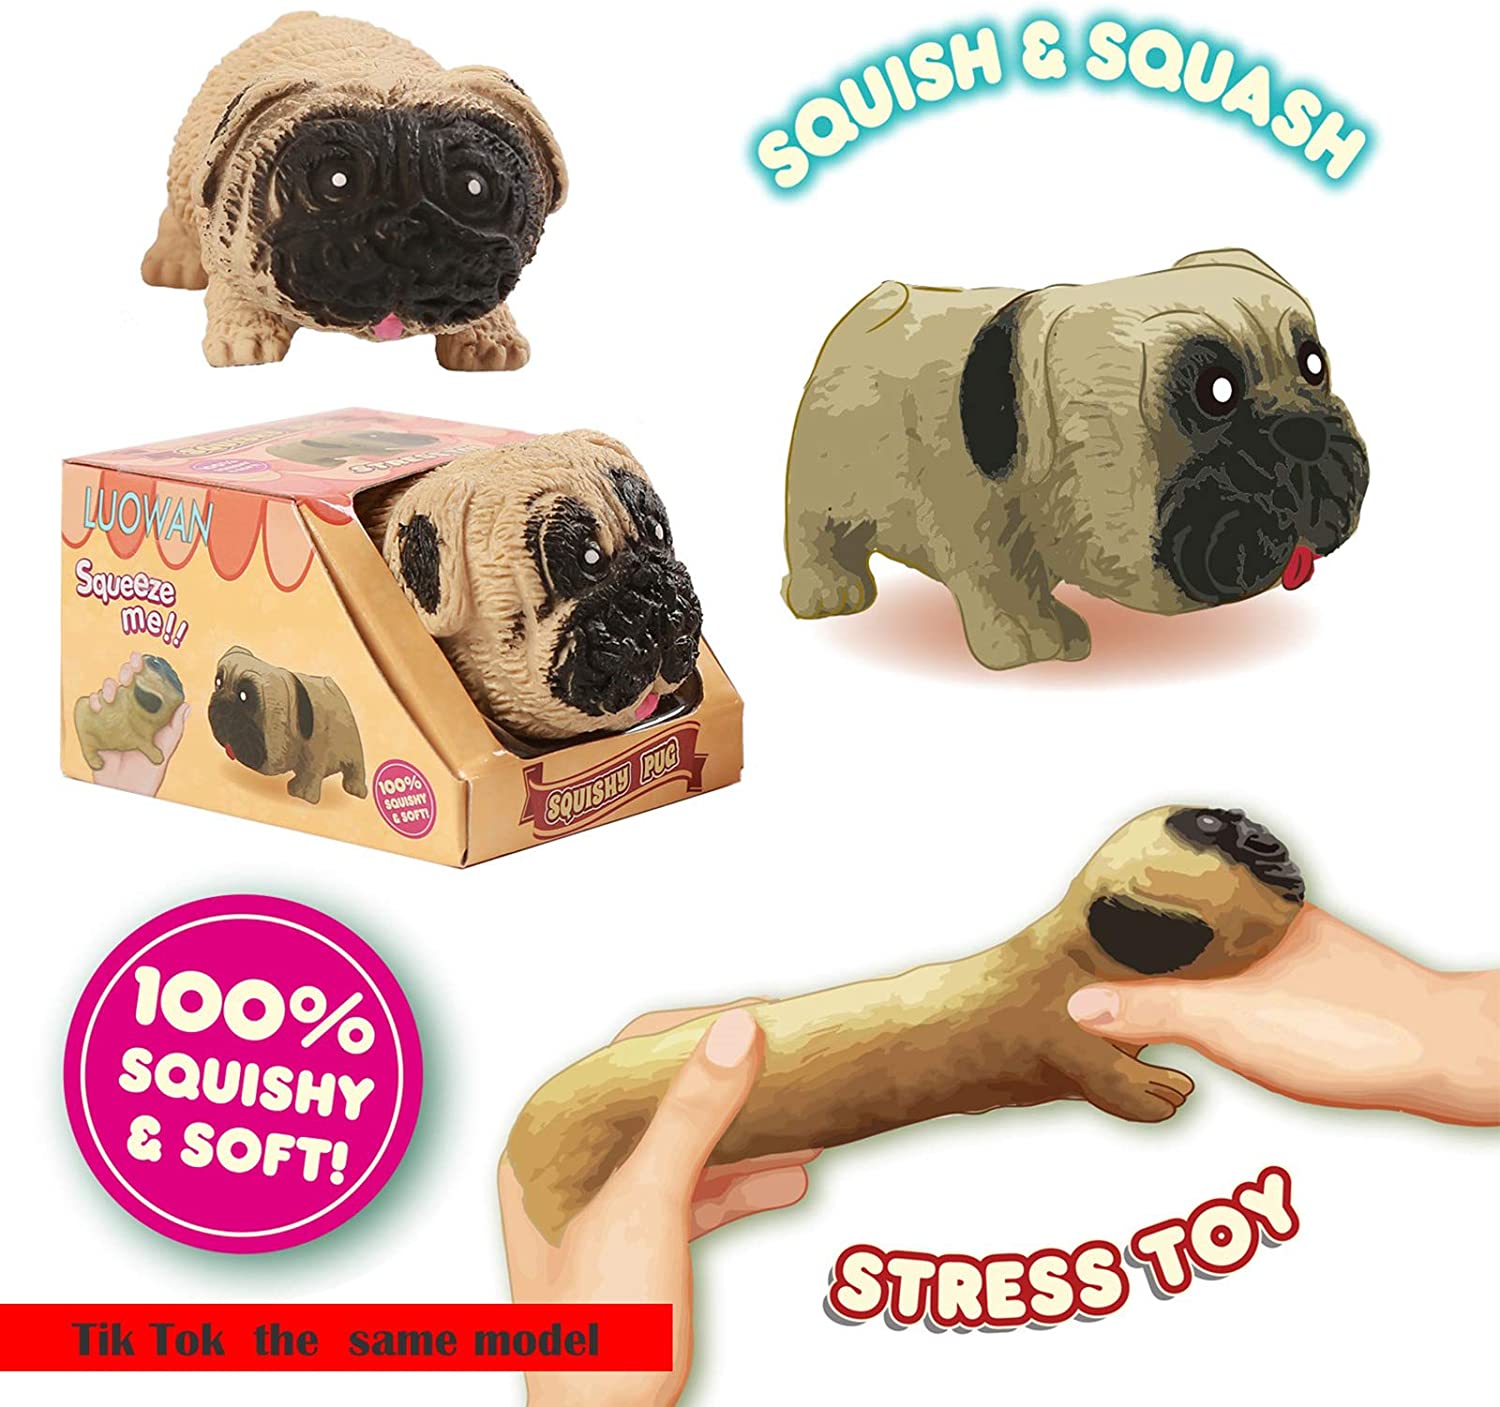 Early Spring Hot Sale 48% OFF - Squishy Pug Dog(BUY 2 GET EXTRA 10% OFF NOW)